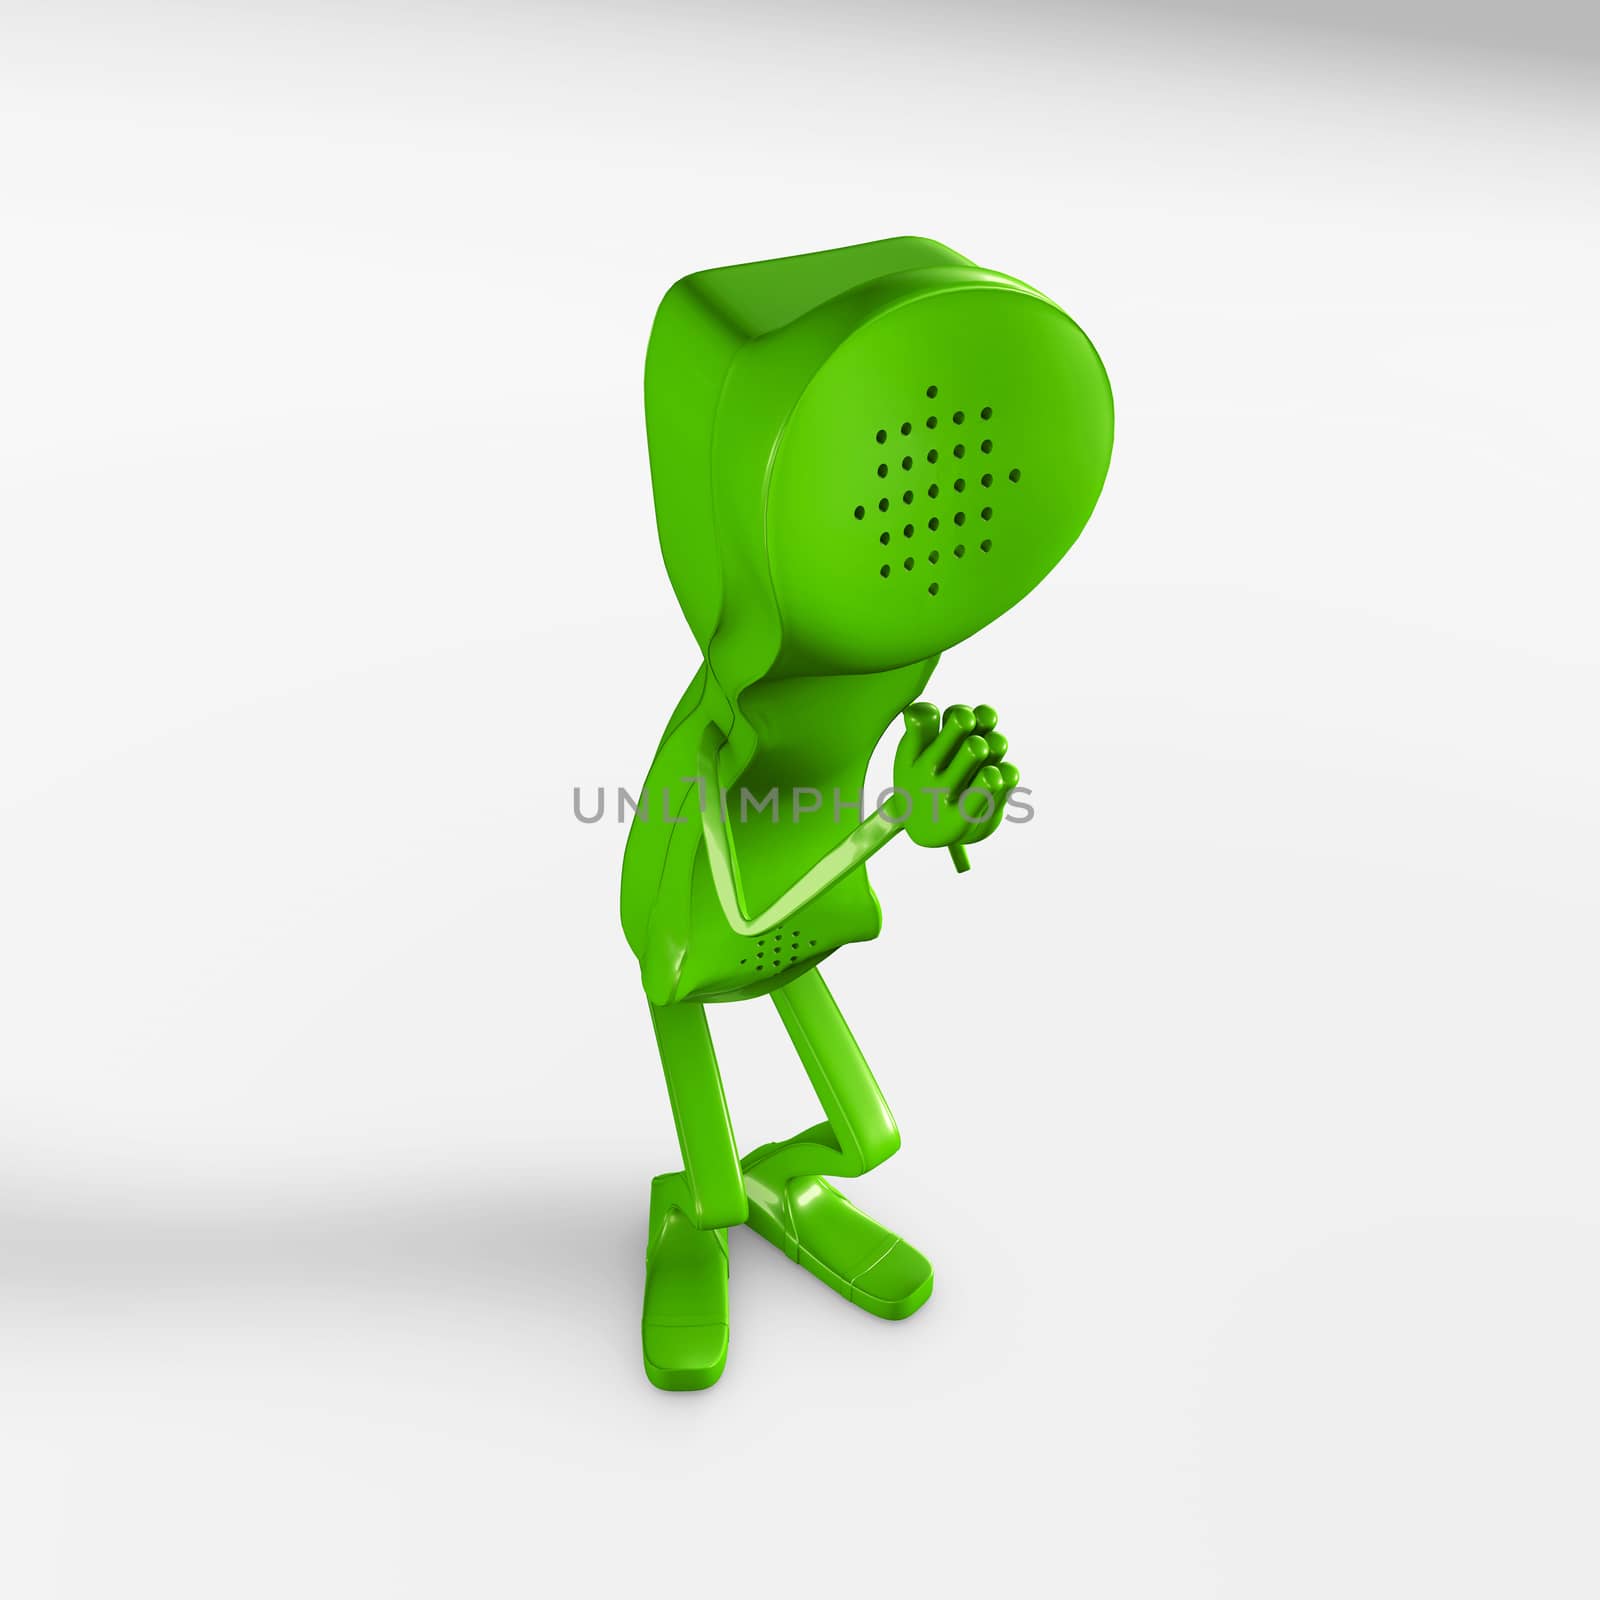 3d rendering of a telephone character praying isolated on white background